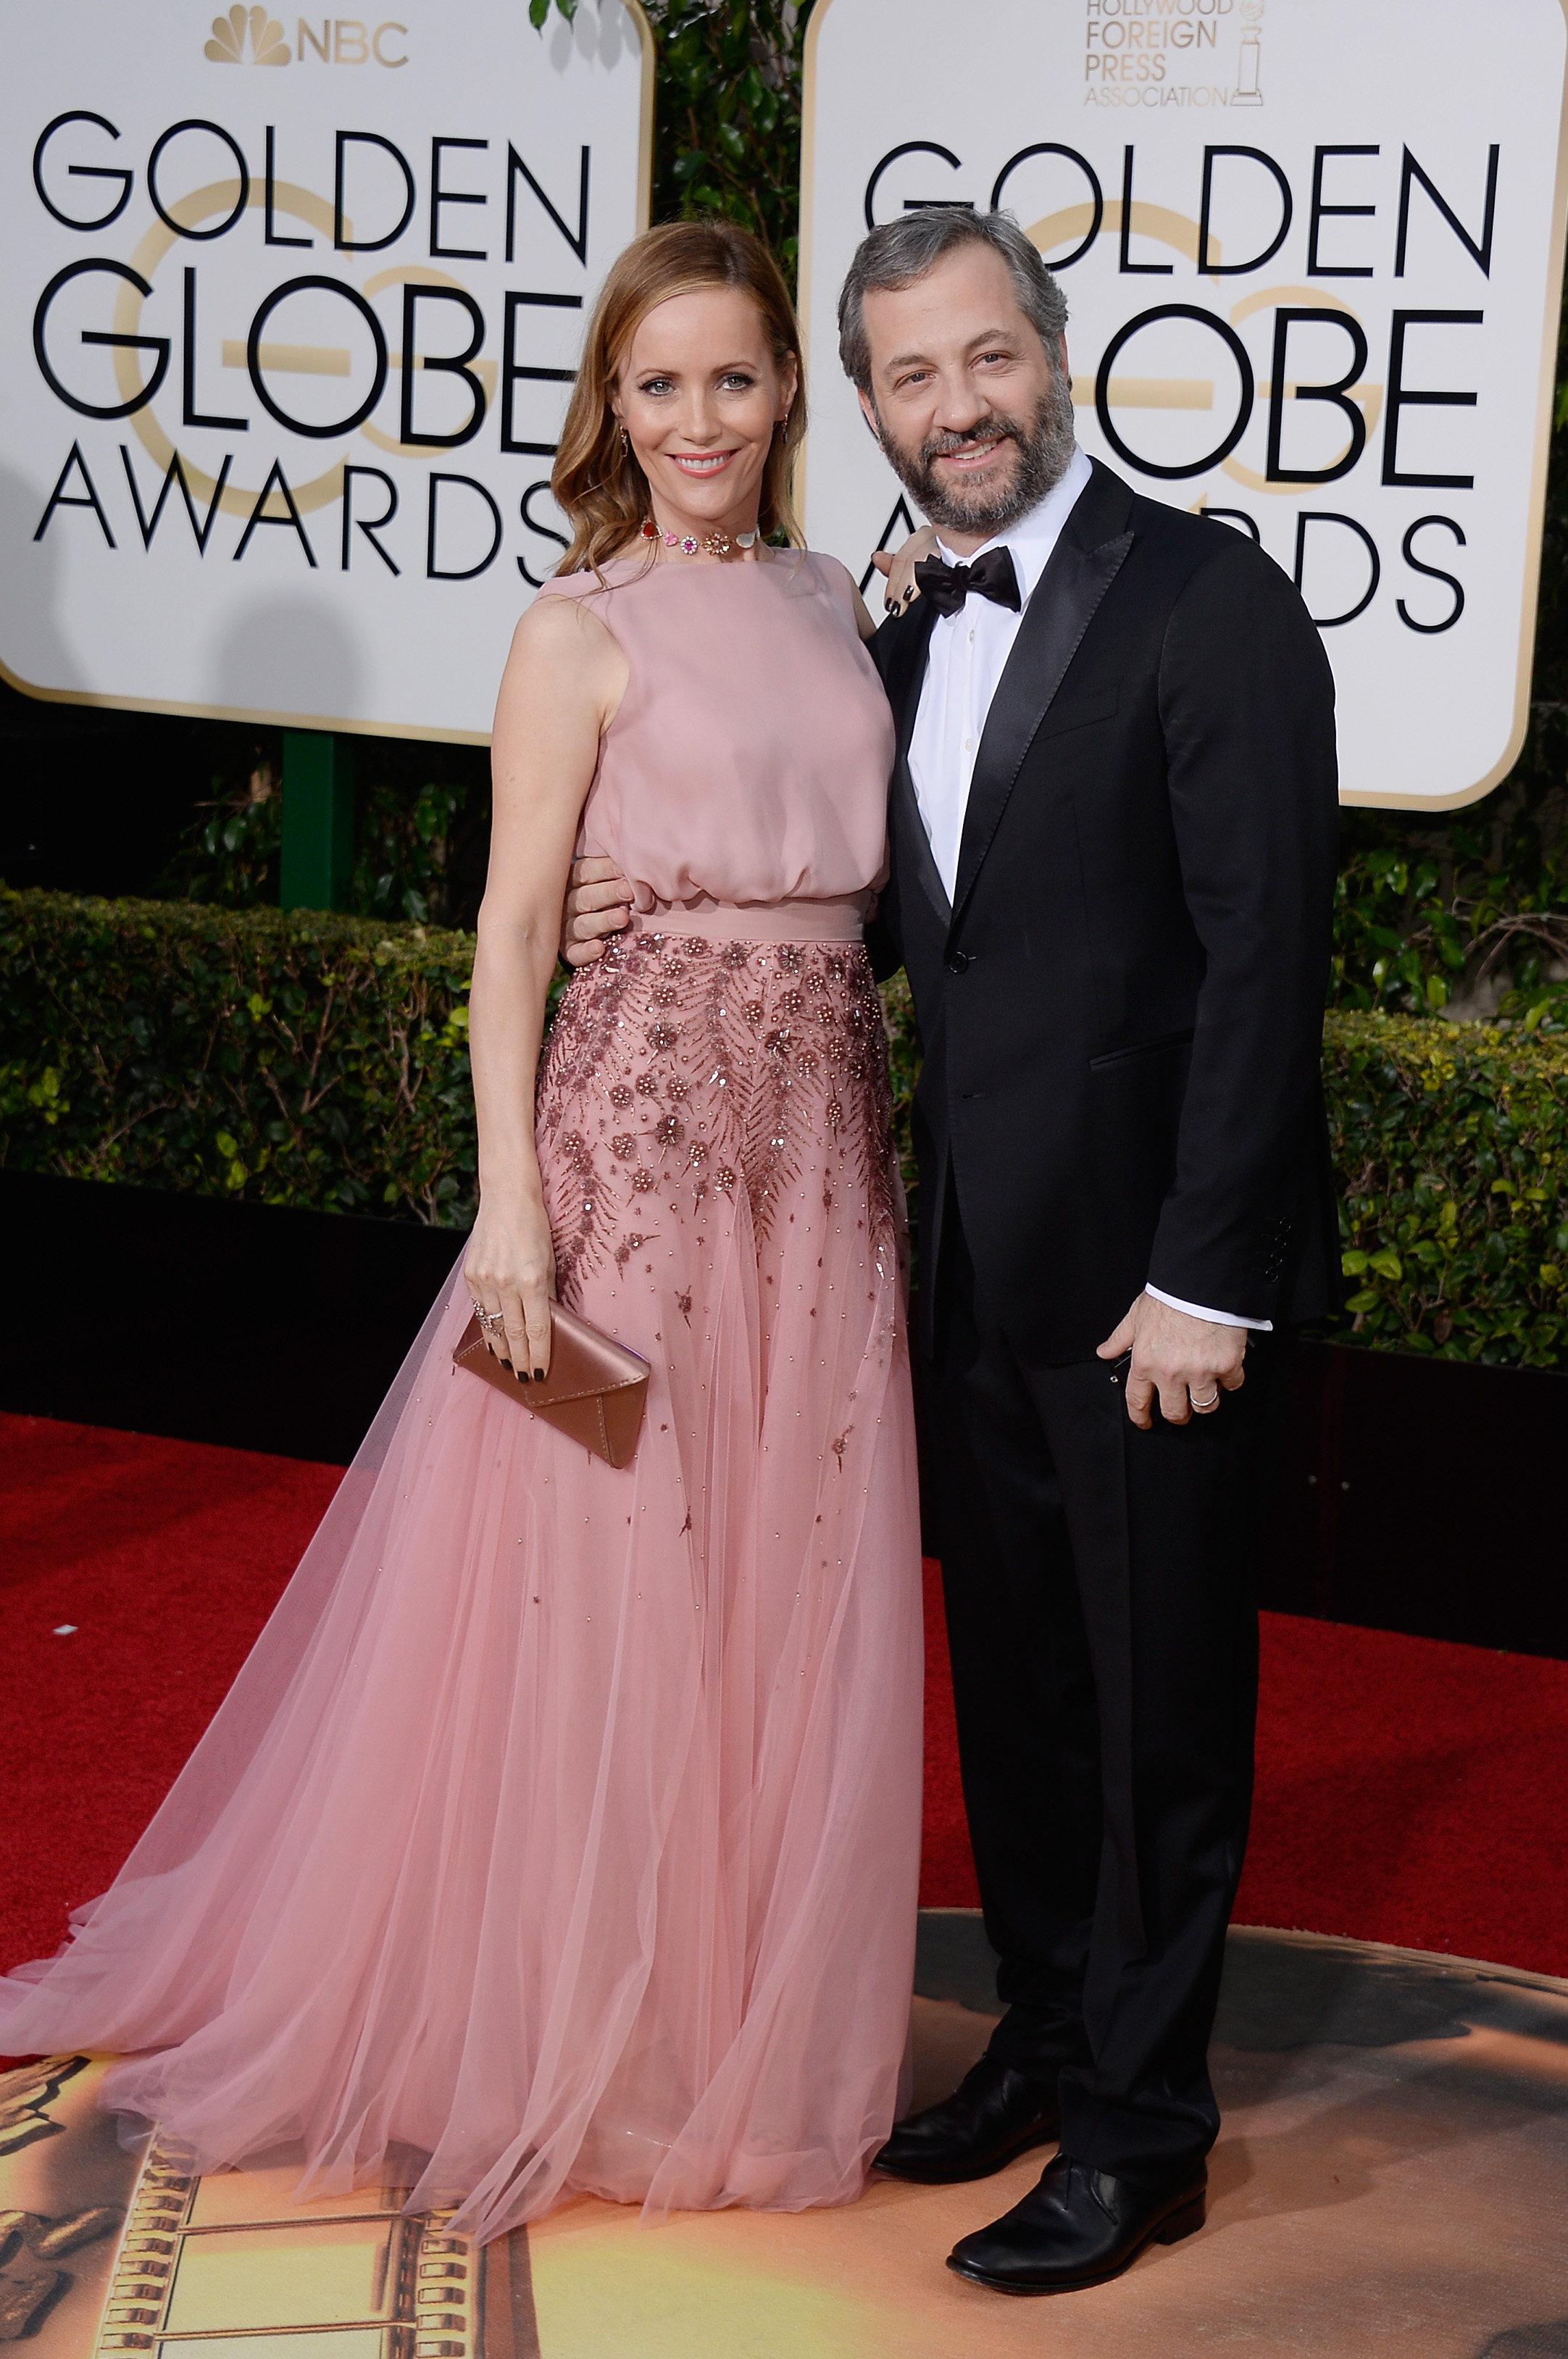 Leslie Mann and Judd Apatow arrive to the 73rd Annual Golden Globe Awards on Jan. 10, 2016 in Beverly Hills.